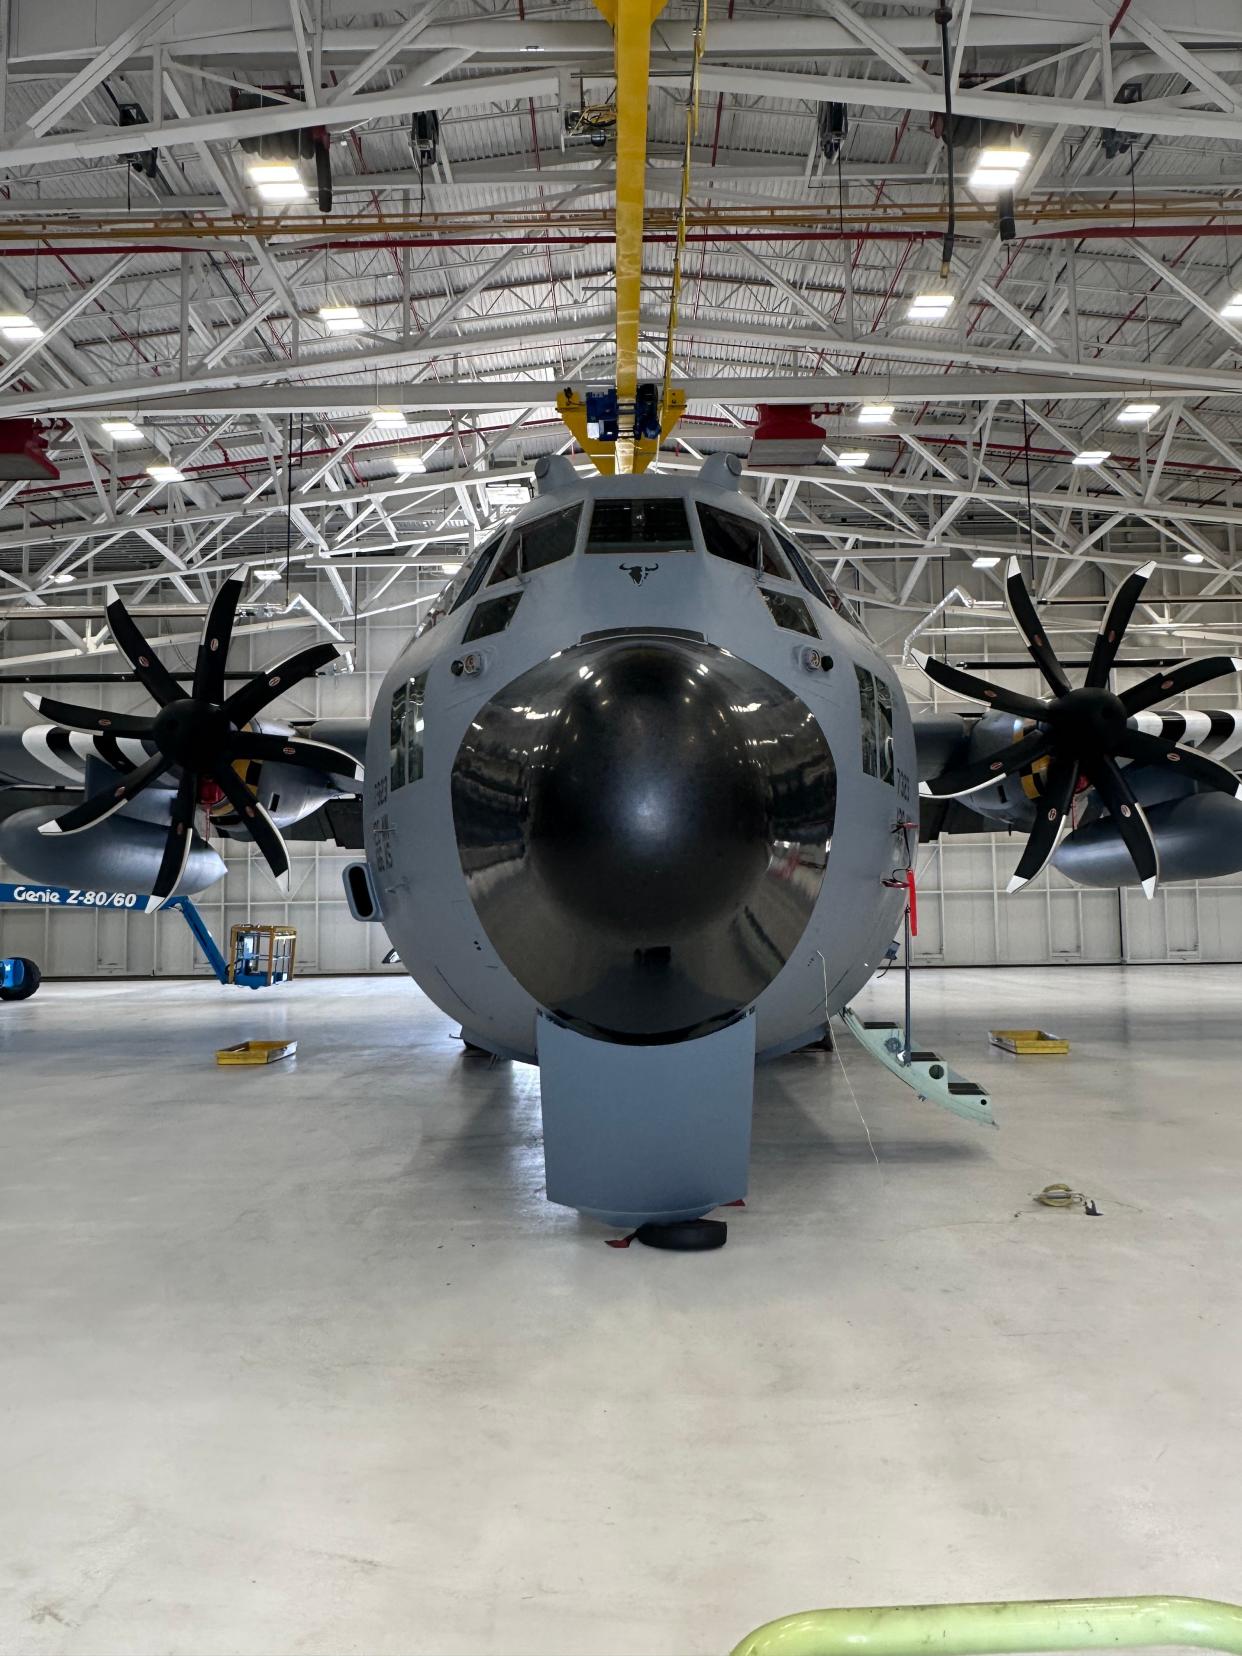 A C-130H Hercules cargo plane is parked for maintenance at the Montana Air National Guard base near Great Falls. The US Air Force has announced that the 120th Airlift Wing at Great Falls will receive eight new C-130J aircraft to replace the aging C-130Hs.